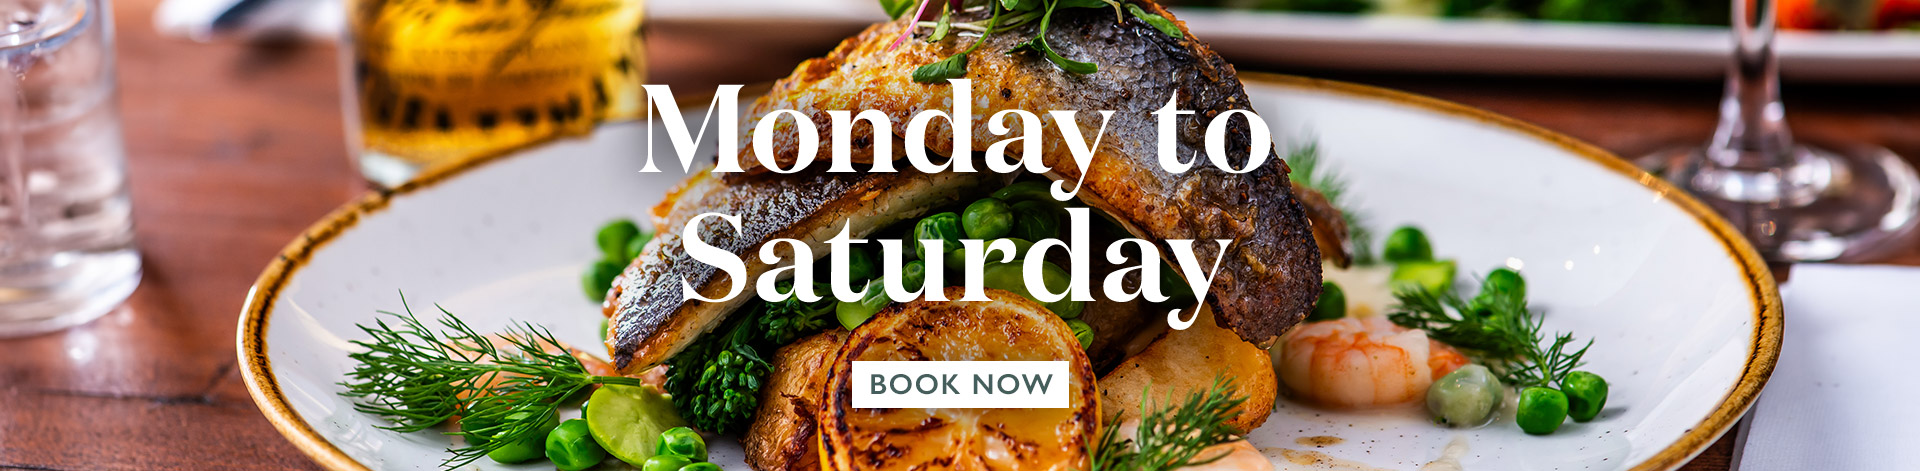 Book now at The Brassmill